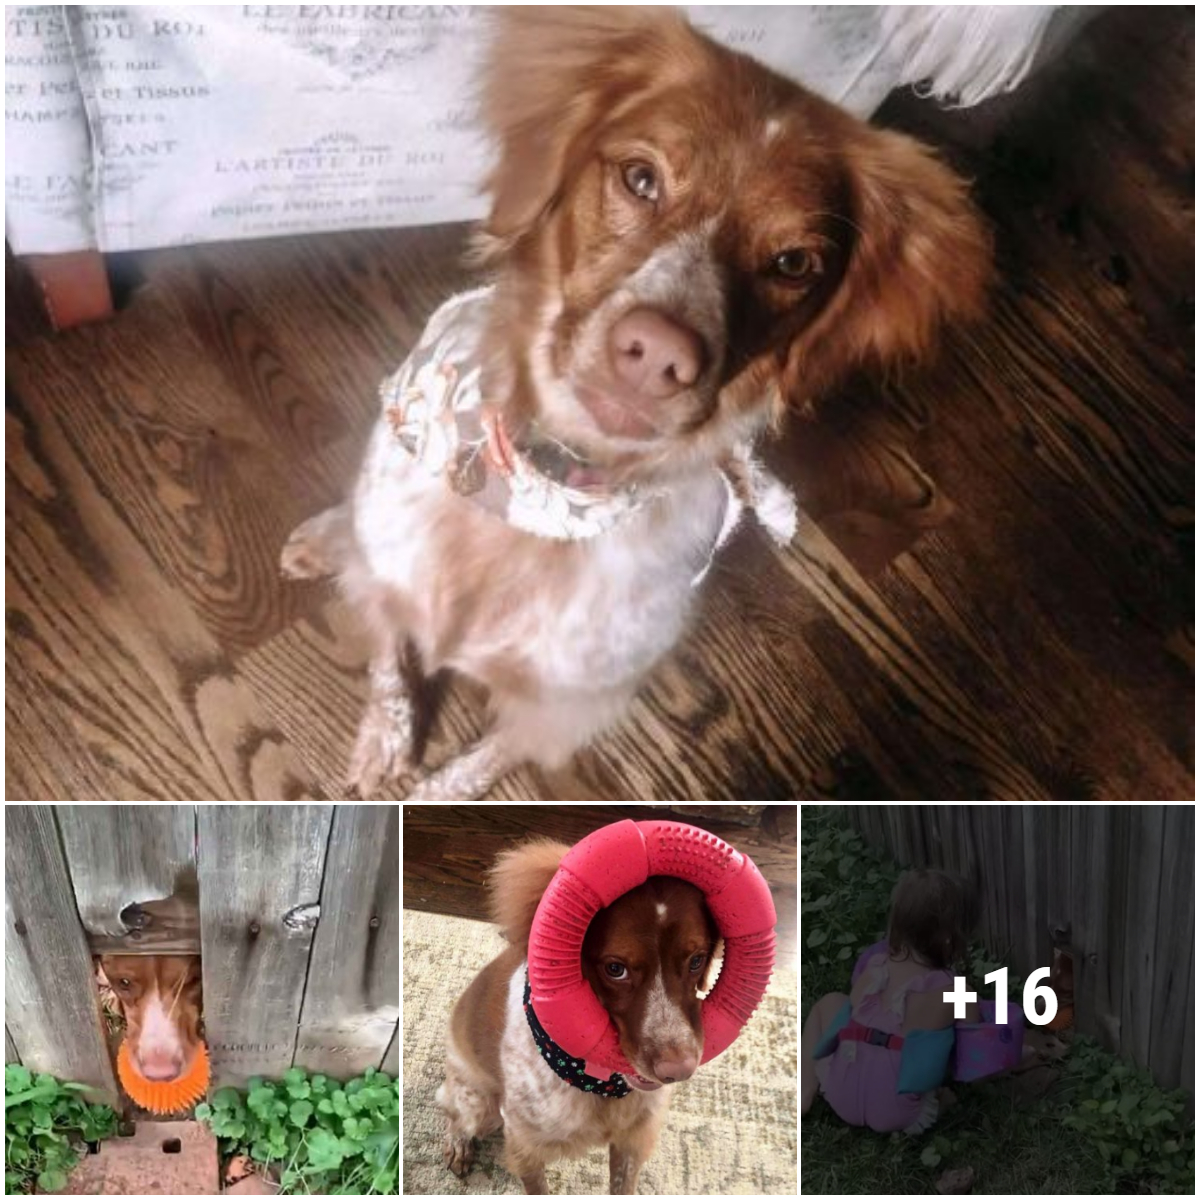 The poor, beautiful neighbor’s dog cried for help when he was stuck in a hole he dug himself and was discovered under interesting circumstances.